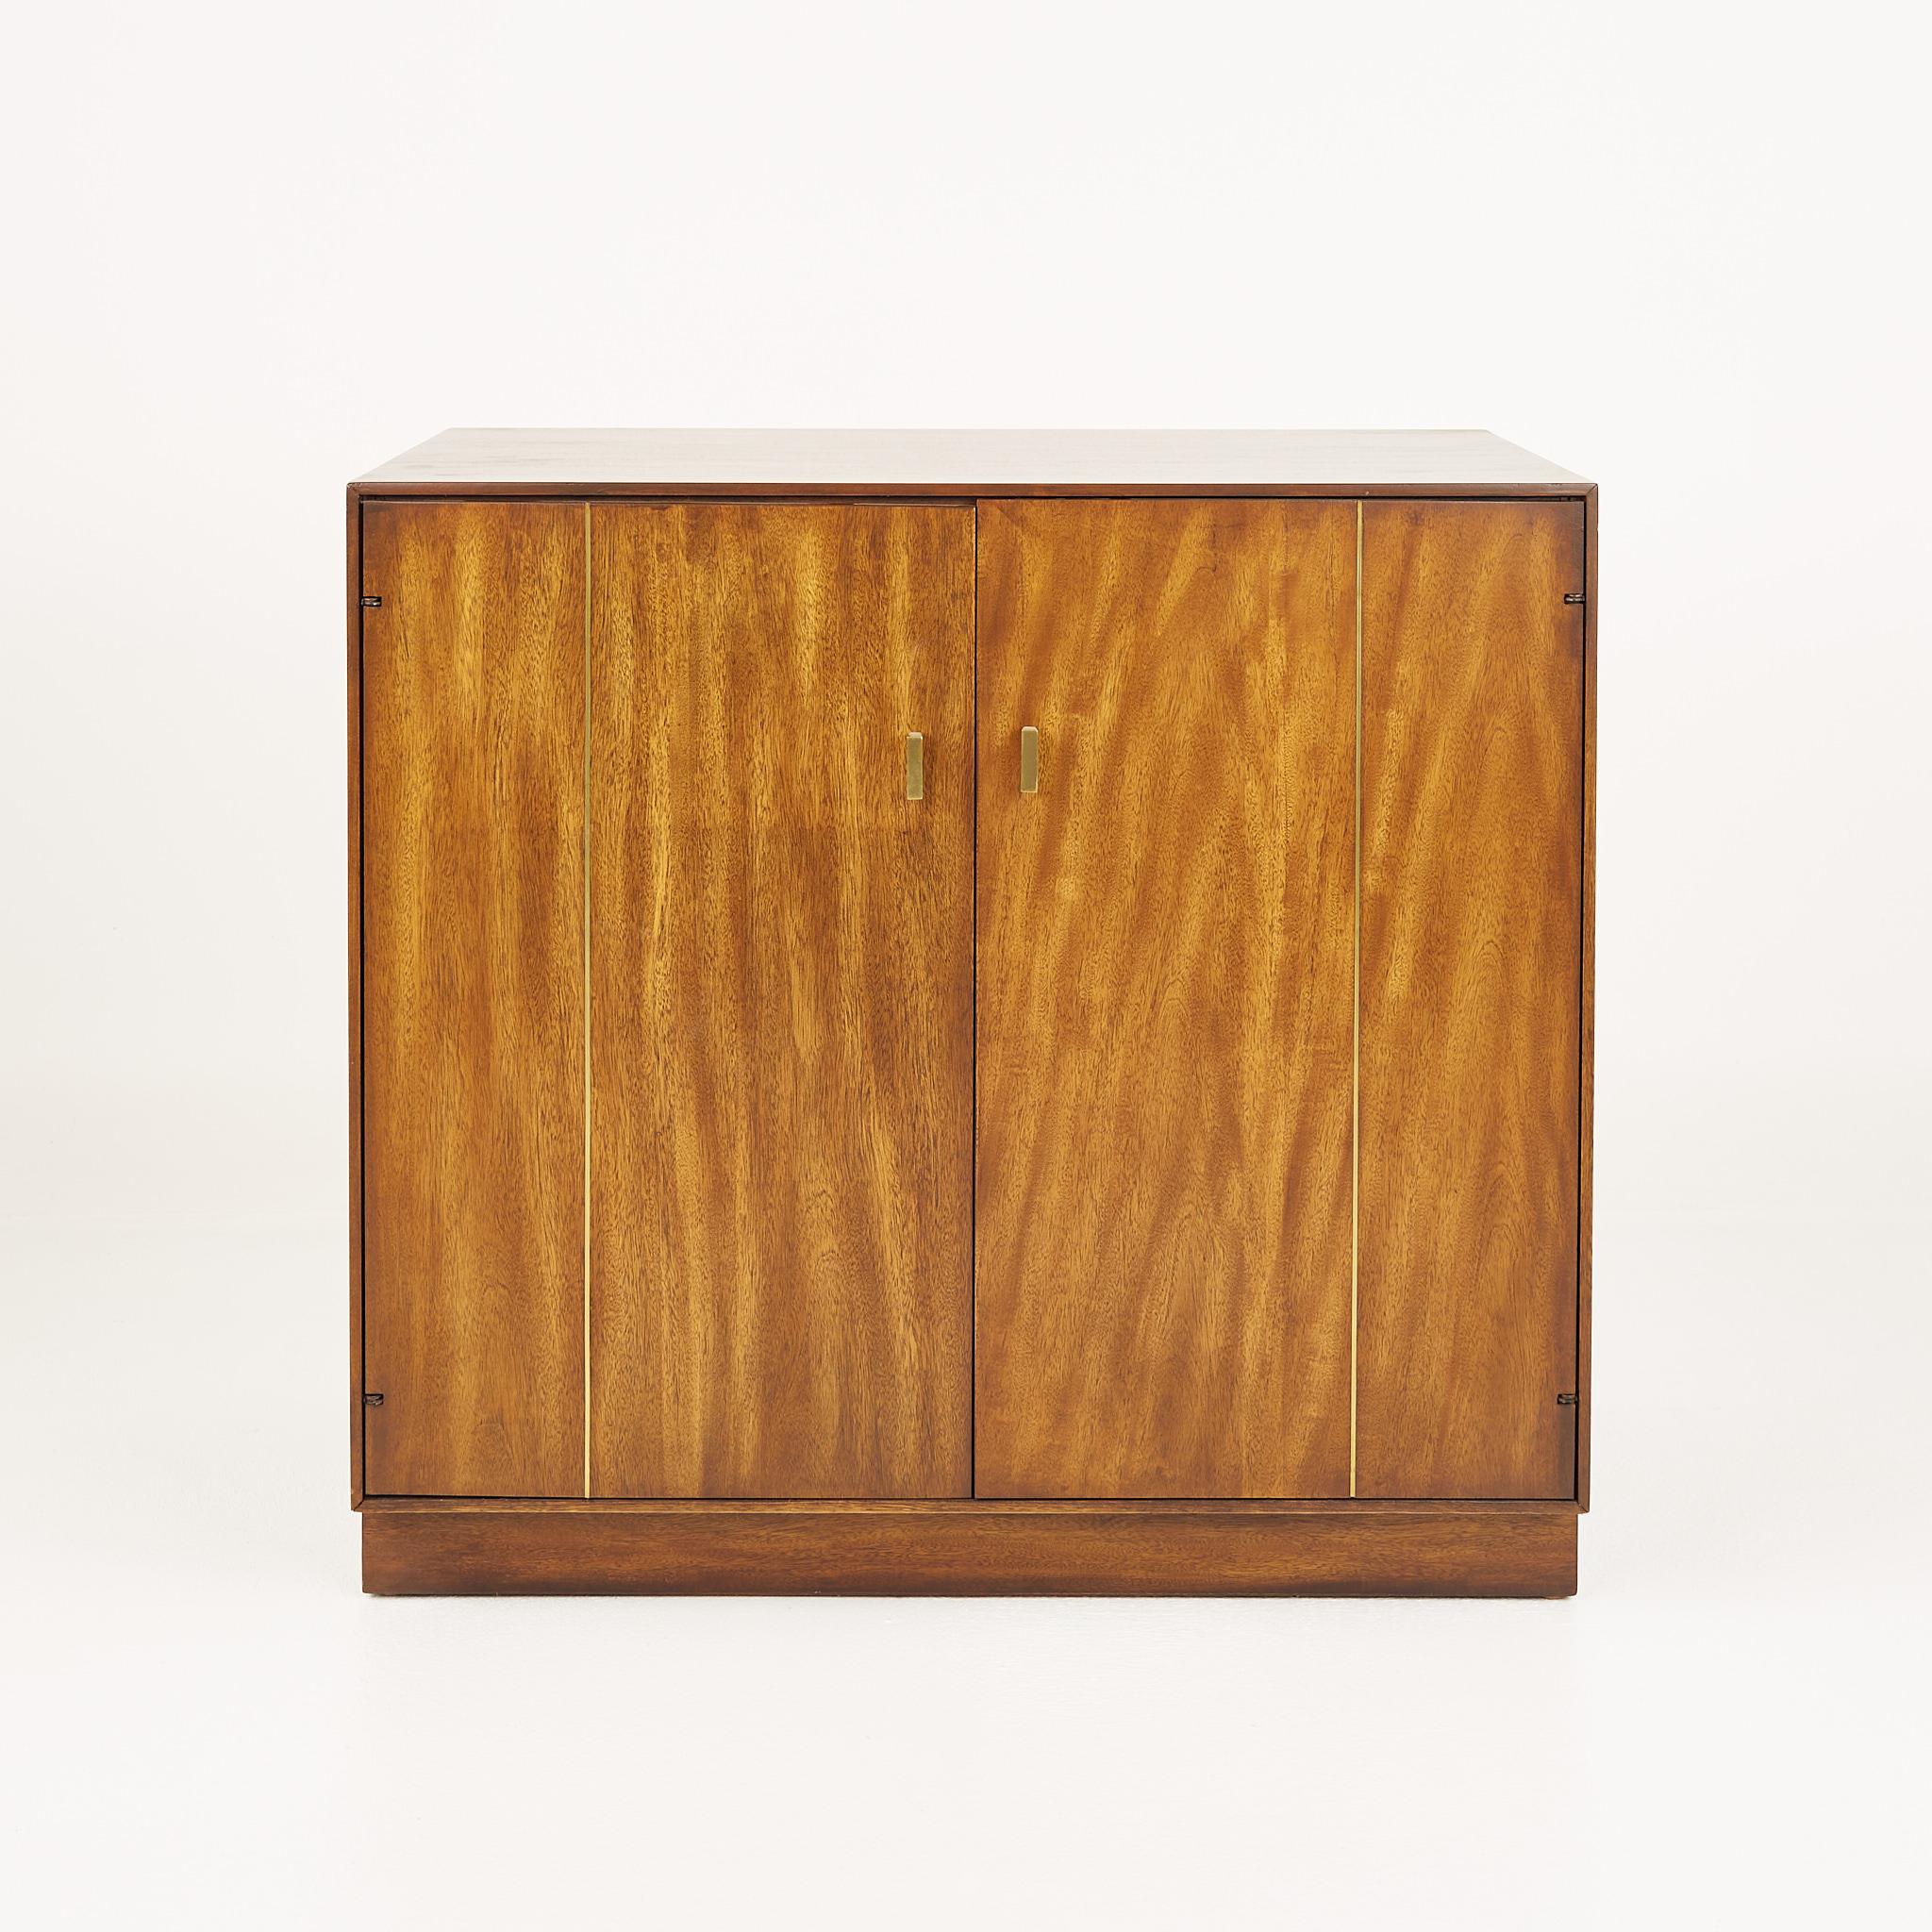 Mid century tigerwood and brass bar record media base cabinet credenza

Credenza measures: 31.5 wide x 19 deep x 29.25 inches high

All pieces of furniture can be had in what we call restored vintage condition. That means the piece is restored